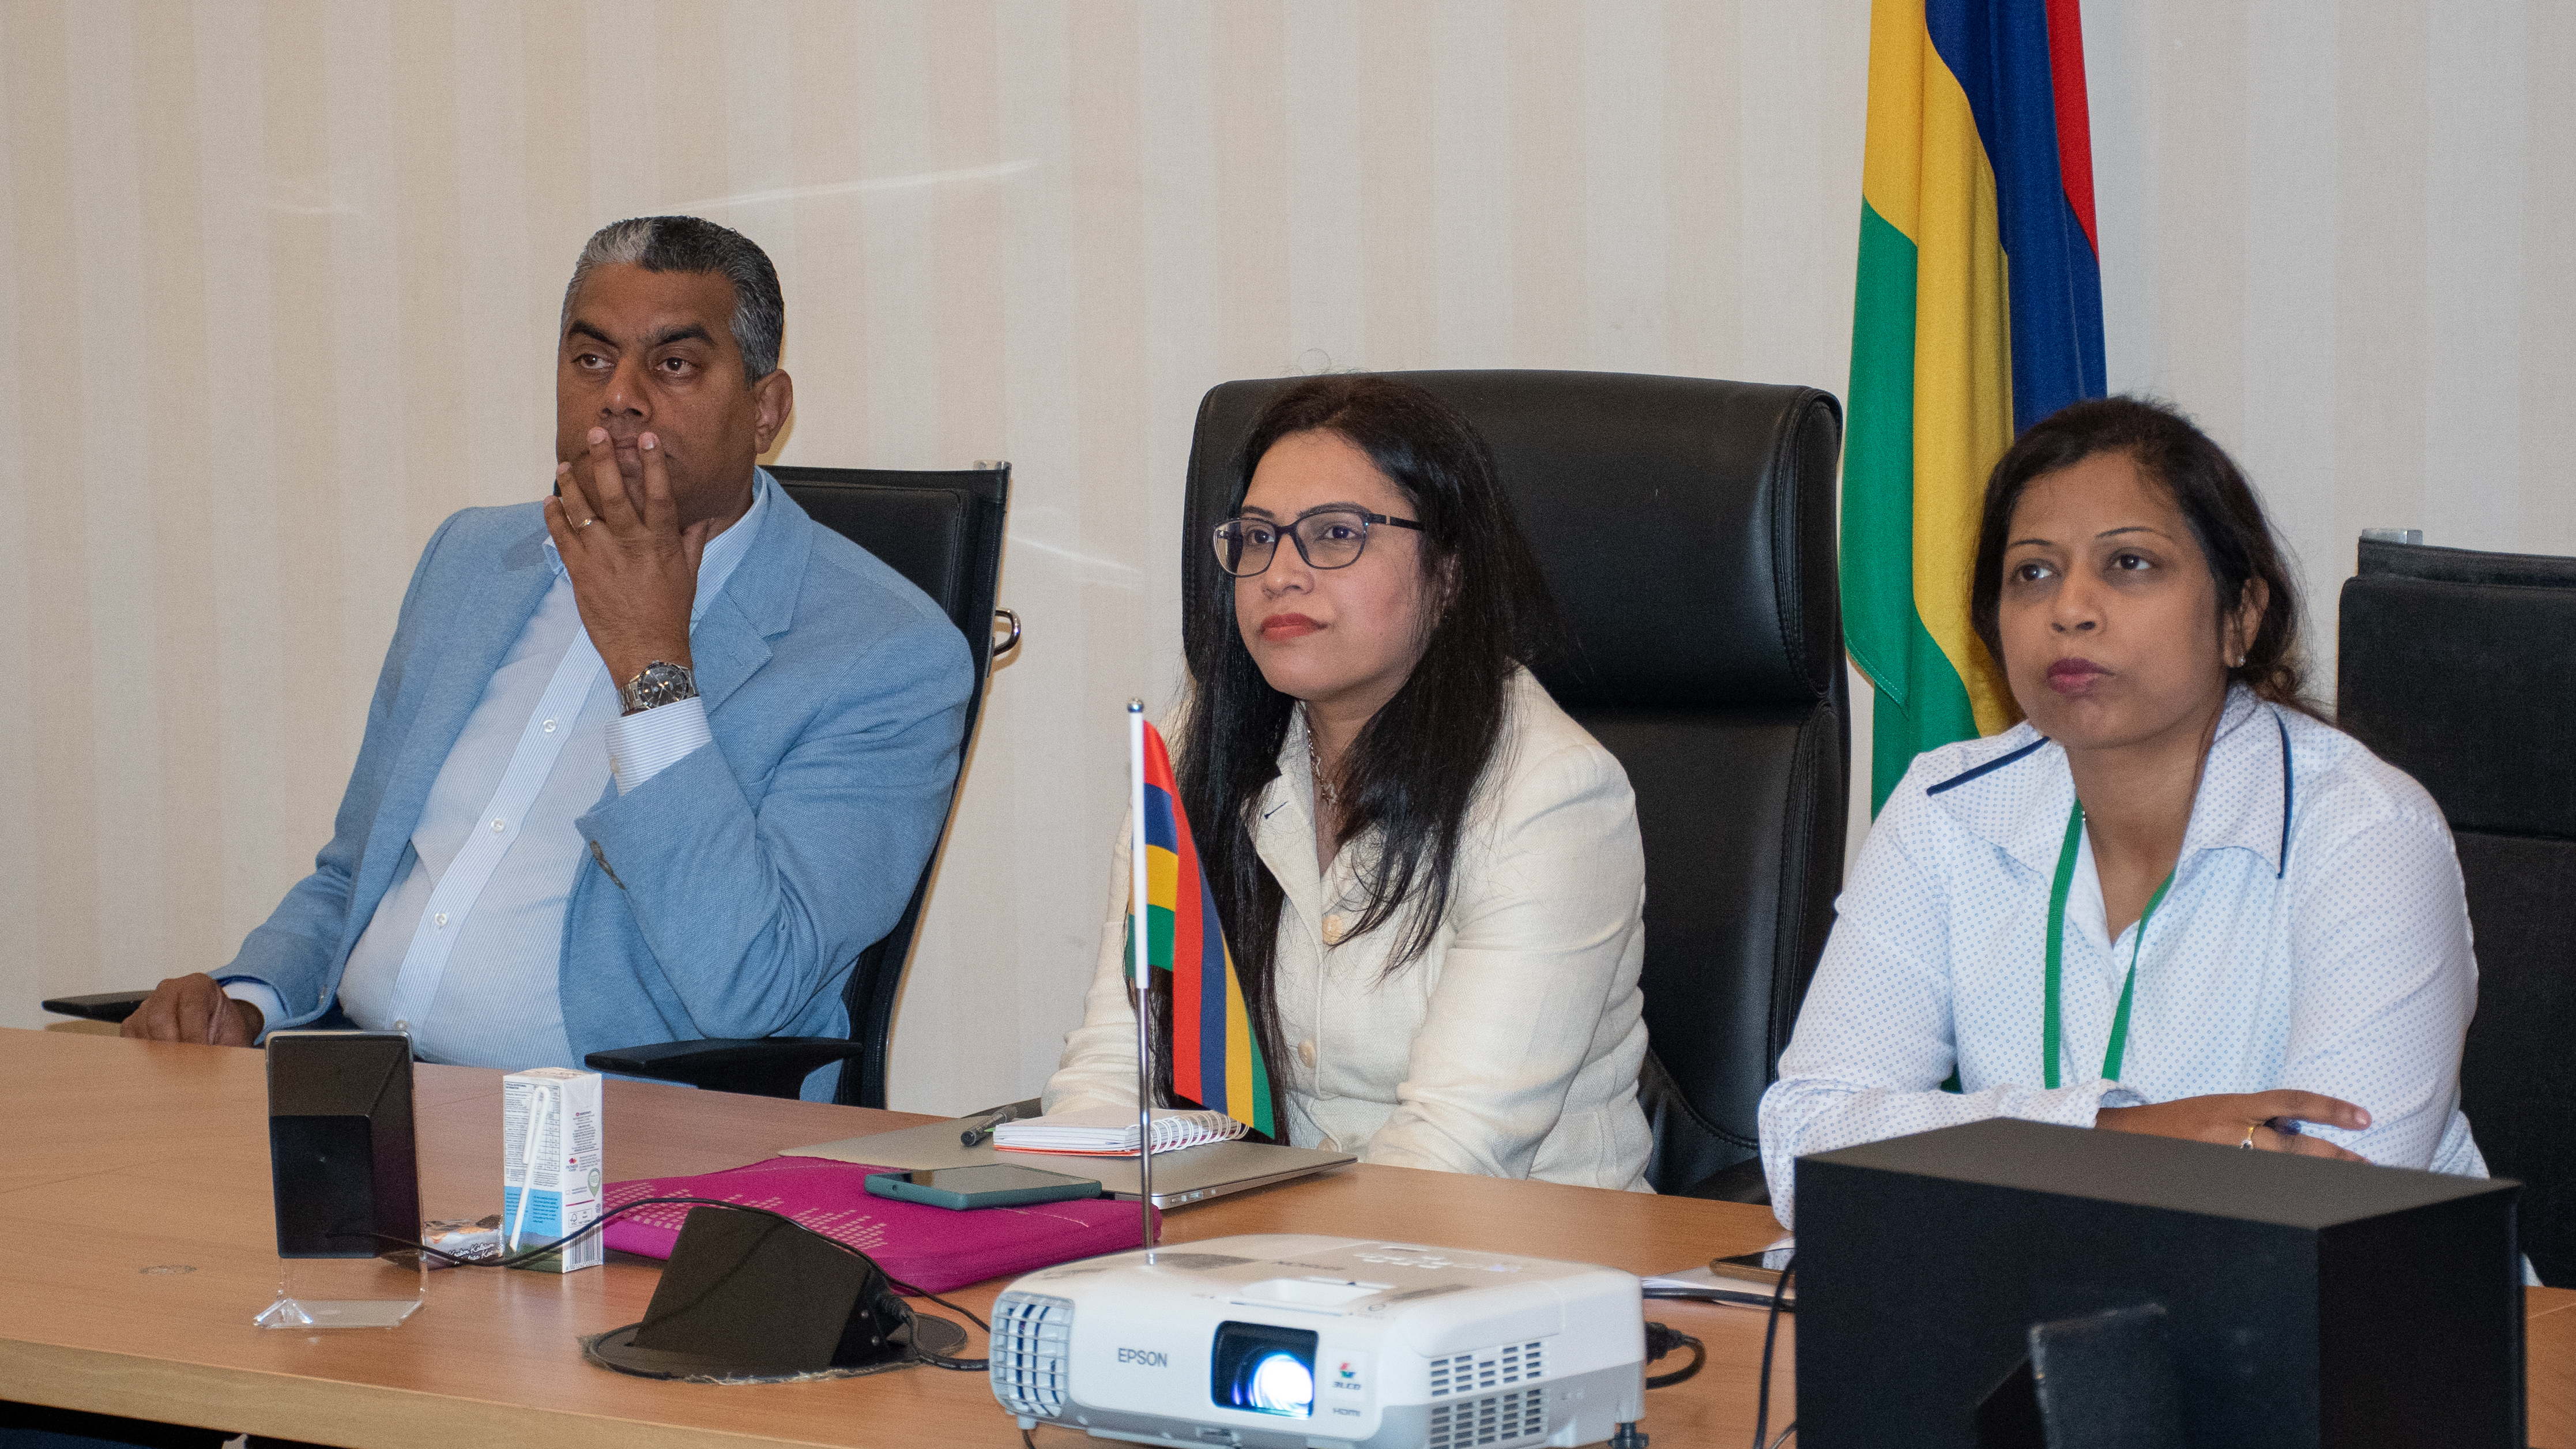 Representatives from the Digital Services and Broadcasting Unit at the Mauritius National Assembly, Harel Mallac Technologies and the UNDP at the kick-off meeting for the Parliamentary ‘e-Document Management System’ project. 